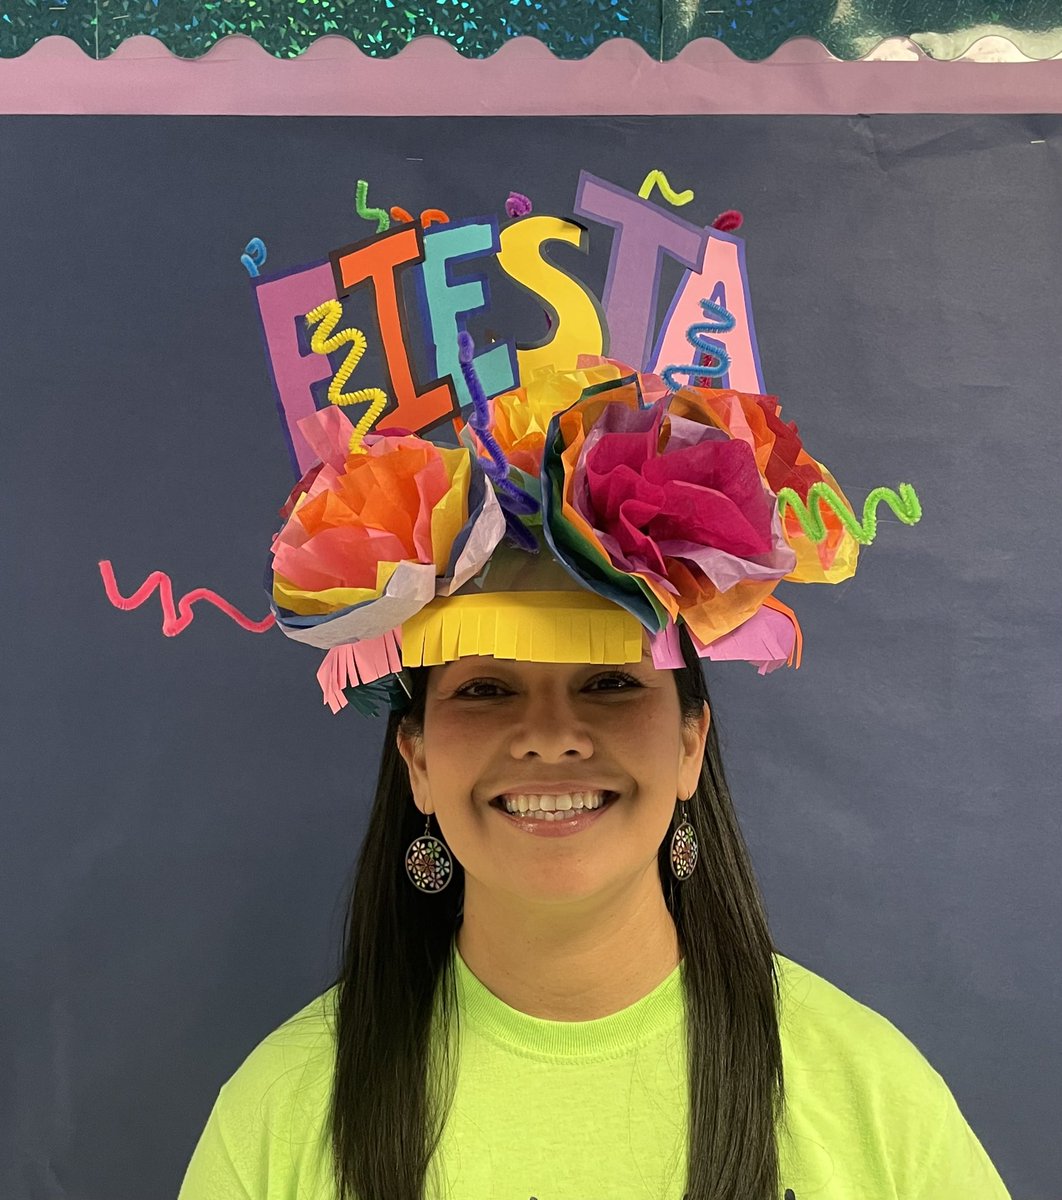 Getting ready for Fiesta 2023 🎉@NISDMcDermott @nursedanak we are transforming face shields into Fiesta head pieces @TeriYasger @NISD_FineArts @NISD @COSAGOV @FiestaSA #Vivafiesta I can’t wait to post student and staff pictures 💙💚